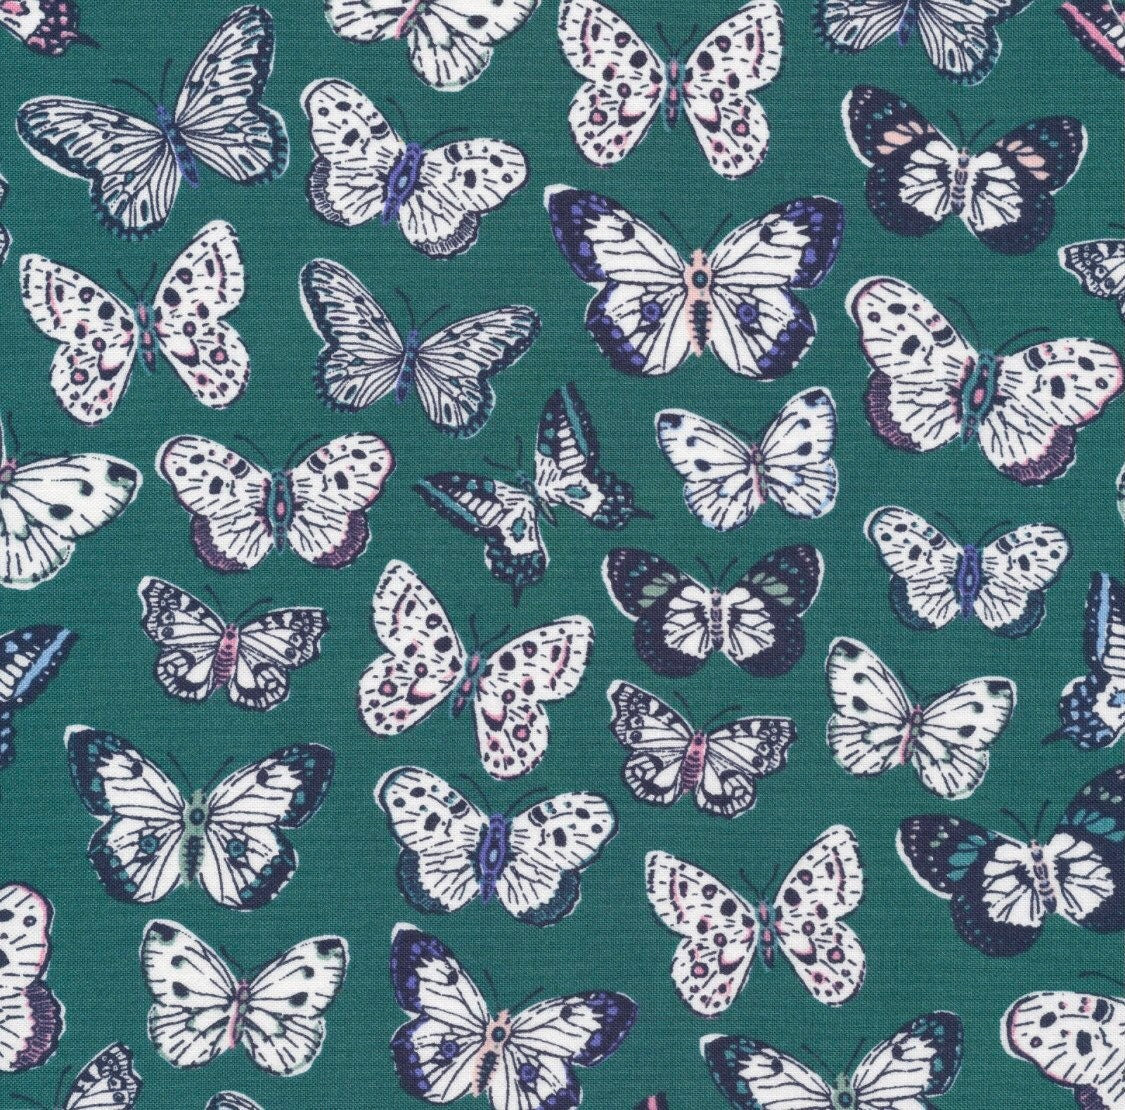 Monarch - Perennial Collection by Cassidy Demkov for Cloud9 Fabrics - 100% Organic Cotton